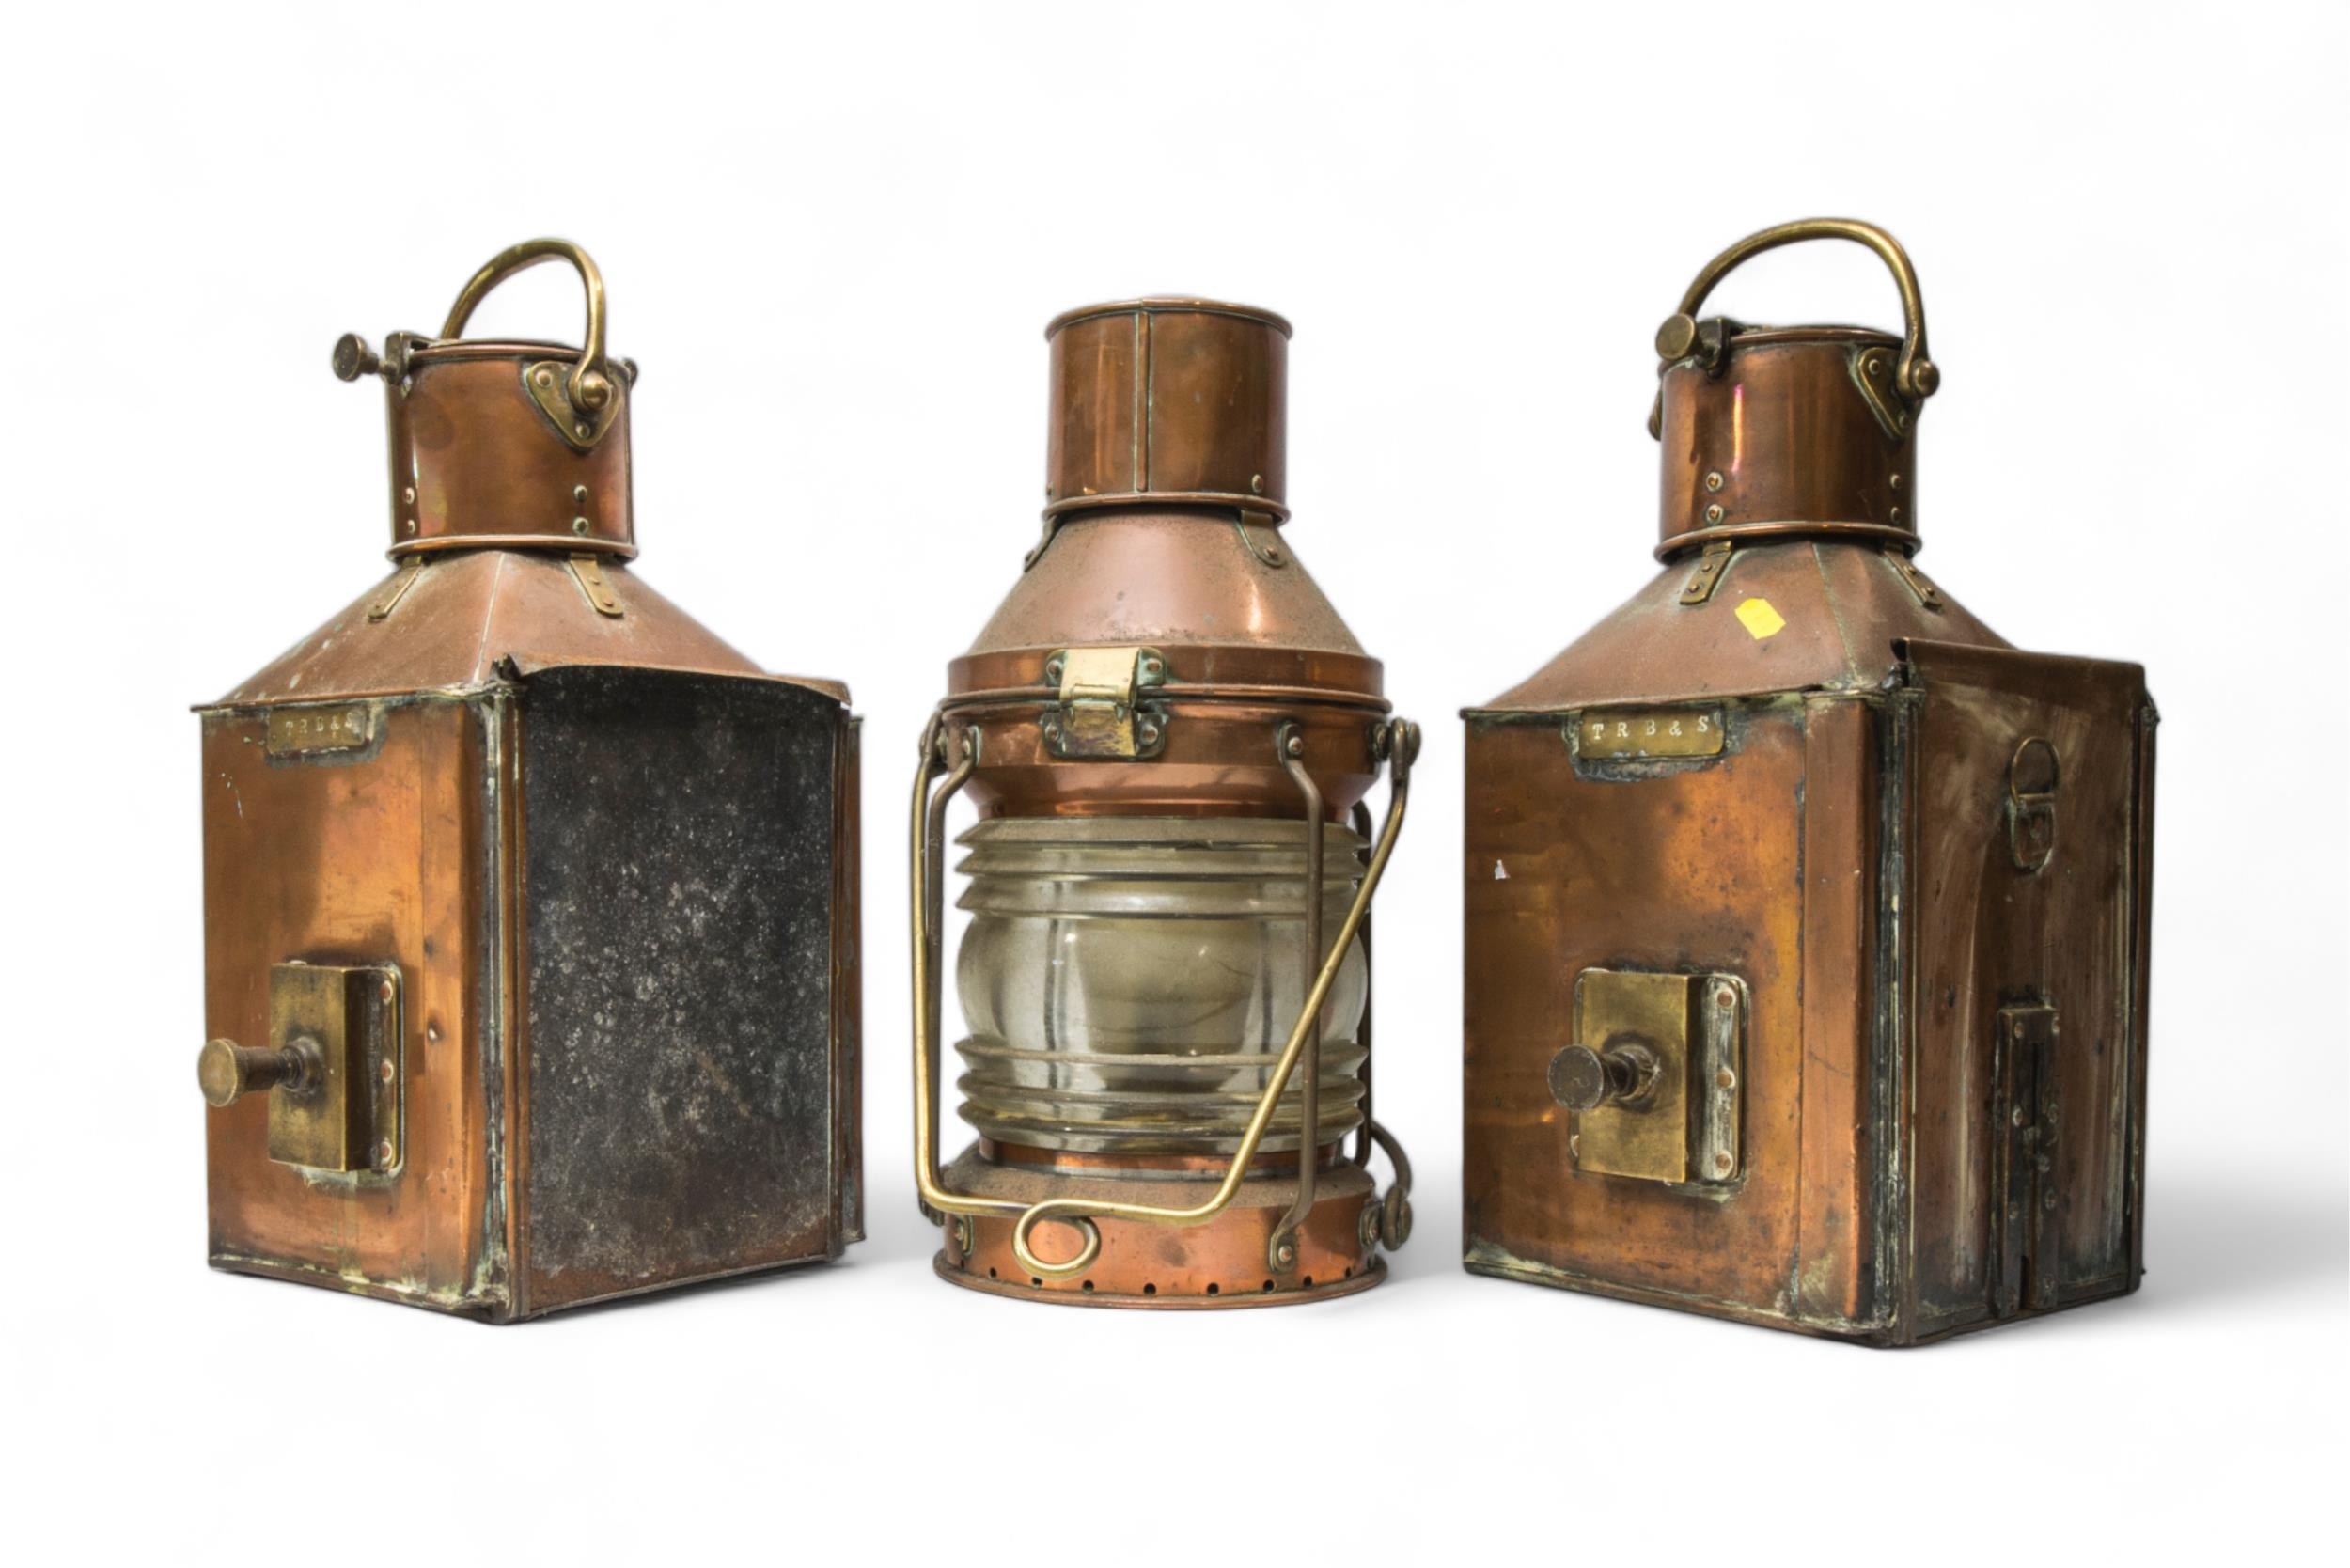 TWO MATCHING COPPER AND BRASS BOAT LANTERNS with plaques for ‘Bow Port Patt 23’ and makers stamped